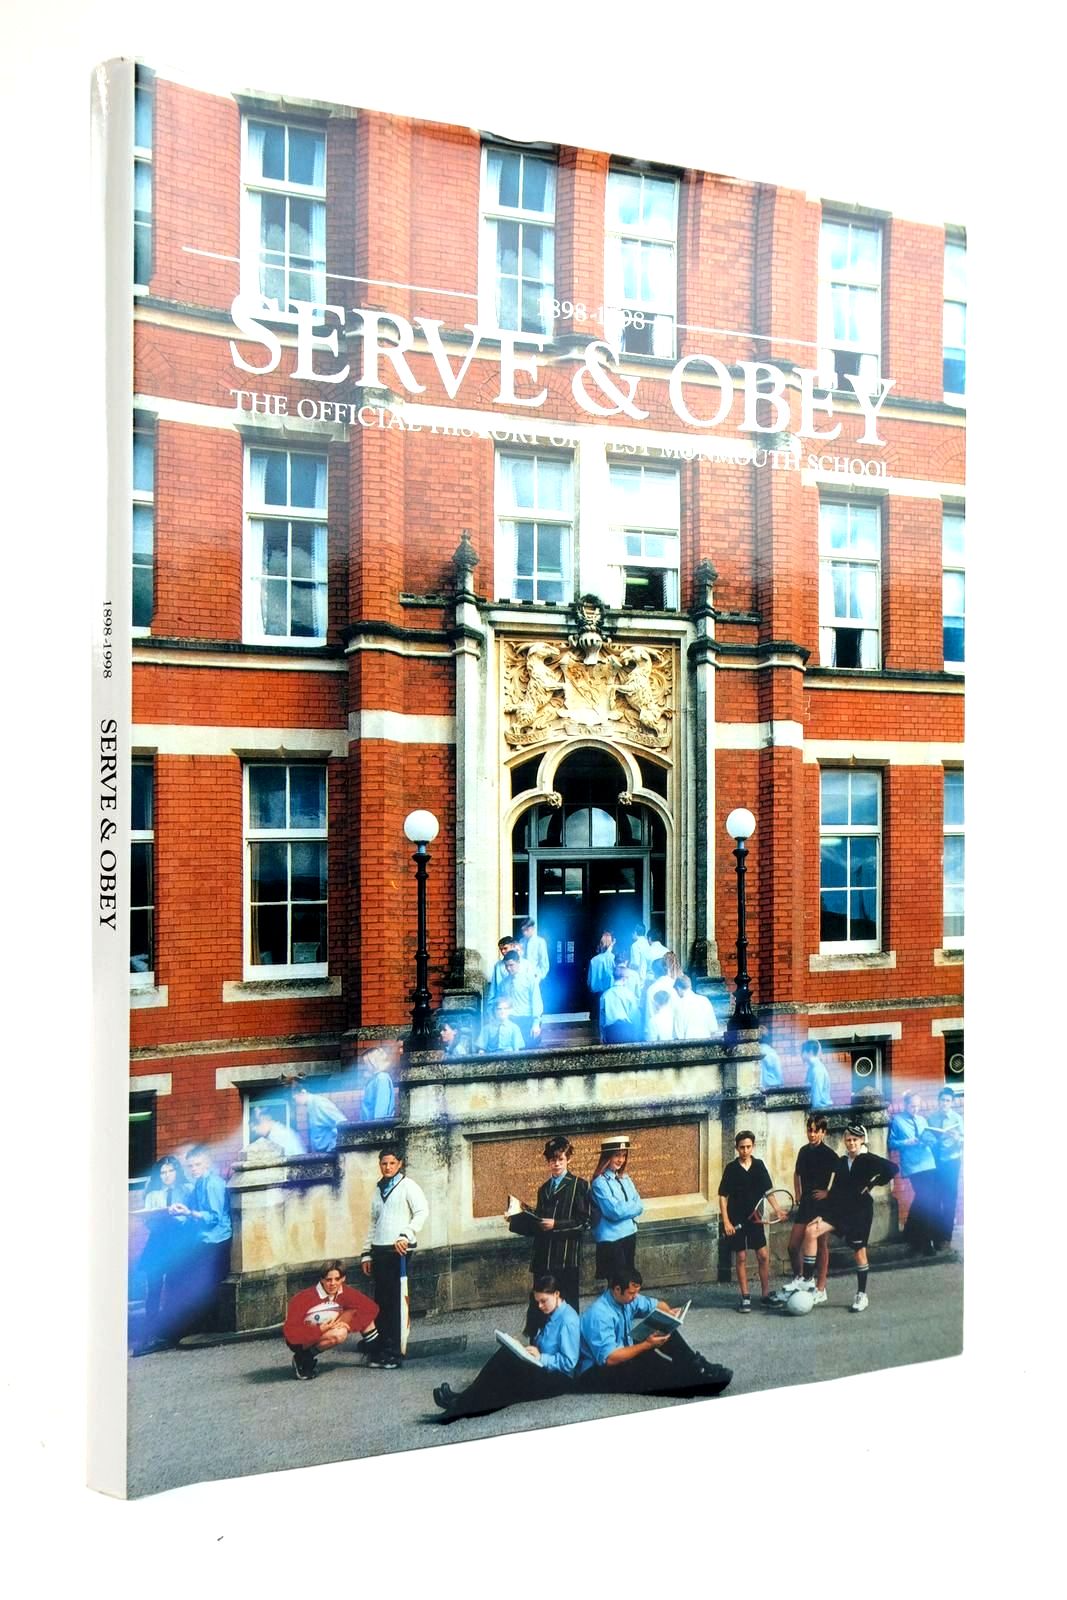 Photo of 1898-1998 SERVE & OBEY: THE OFFICIAL HISTORY OF WEST MONMOUTH SCHOOL- Stock Number: 2135692